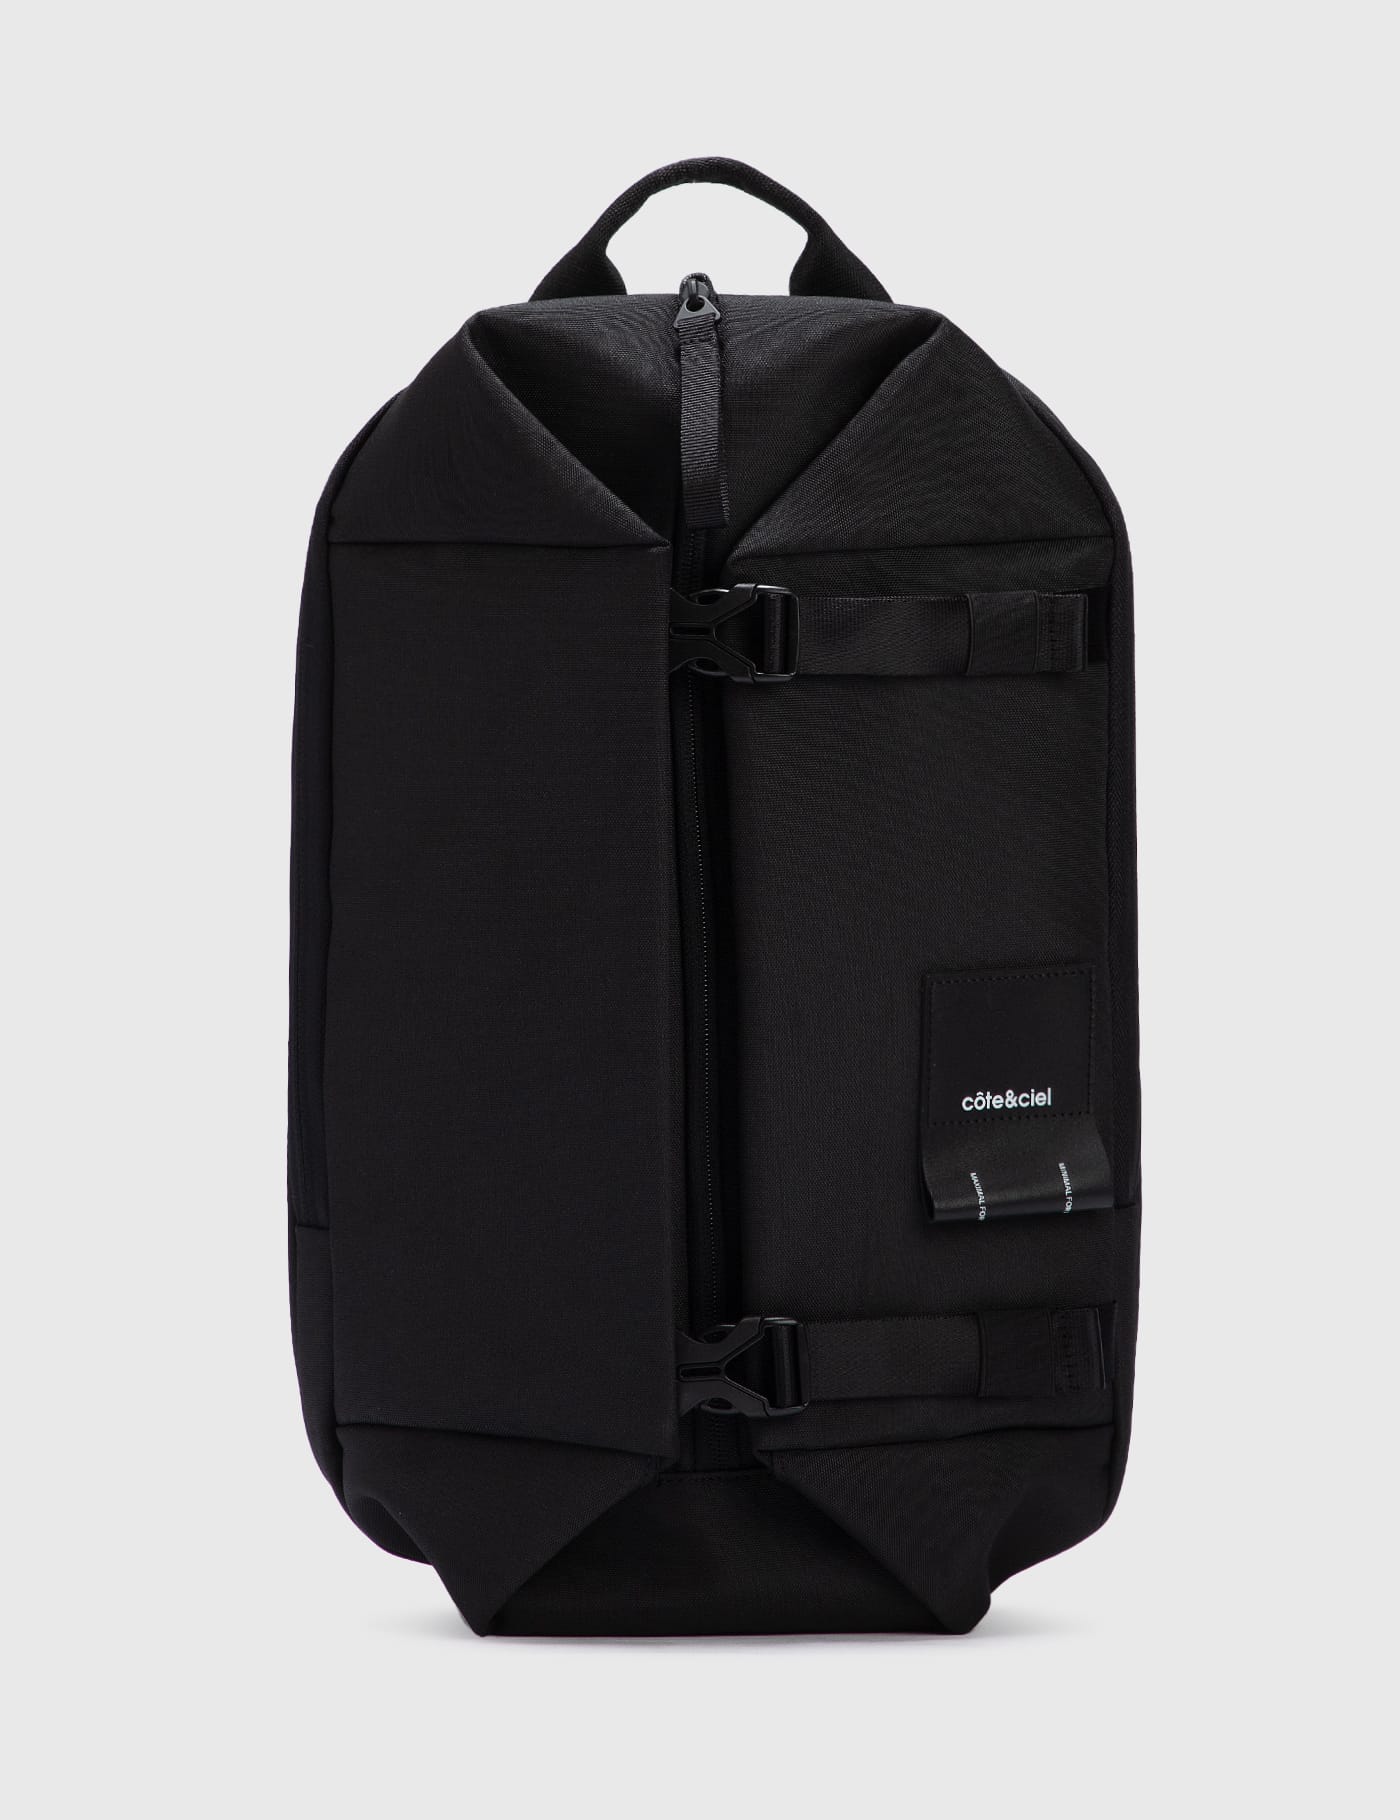 sacai x PORTER Double Pocket Backpack リュック/バックパック バッグ レディース 今なら即発送